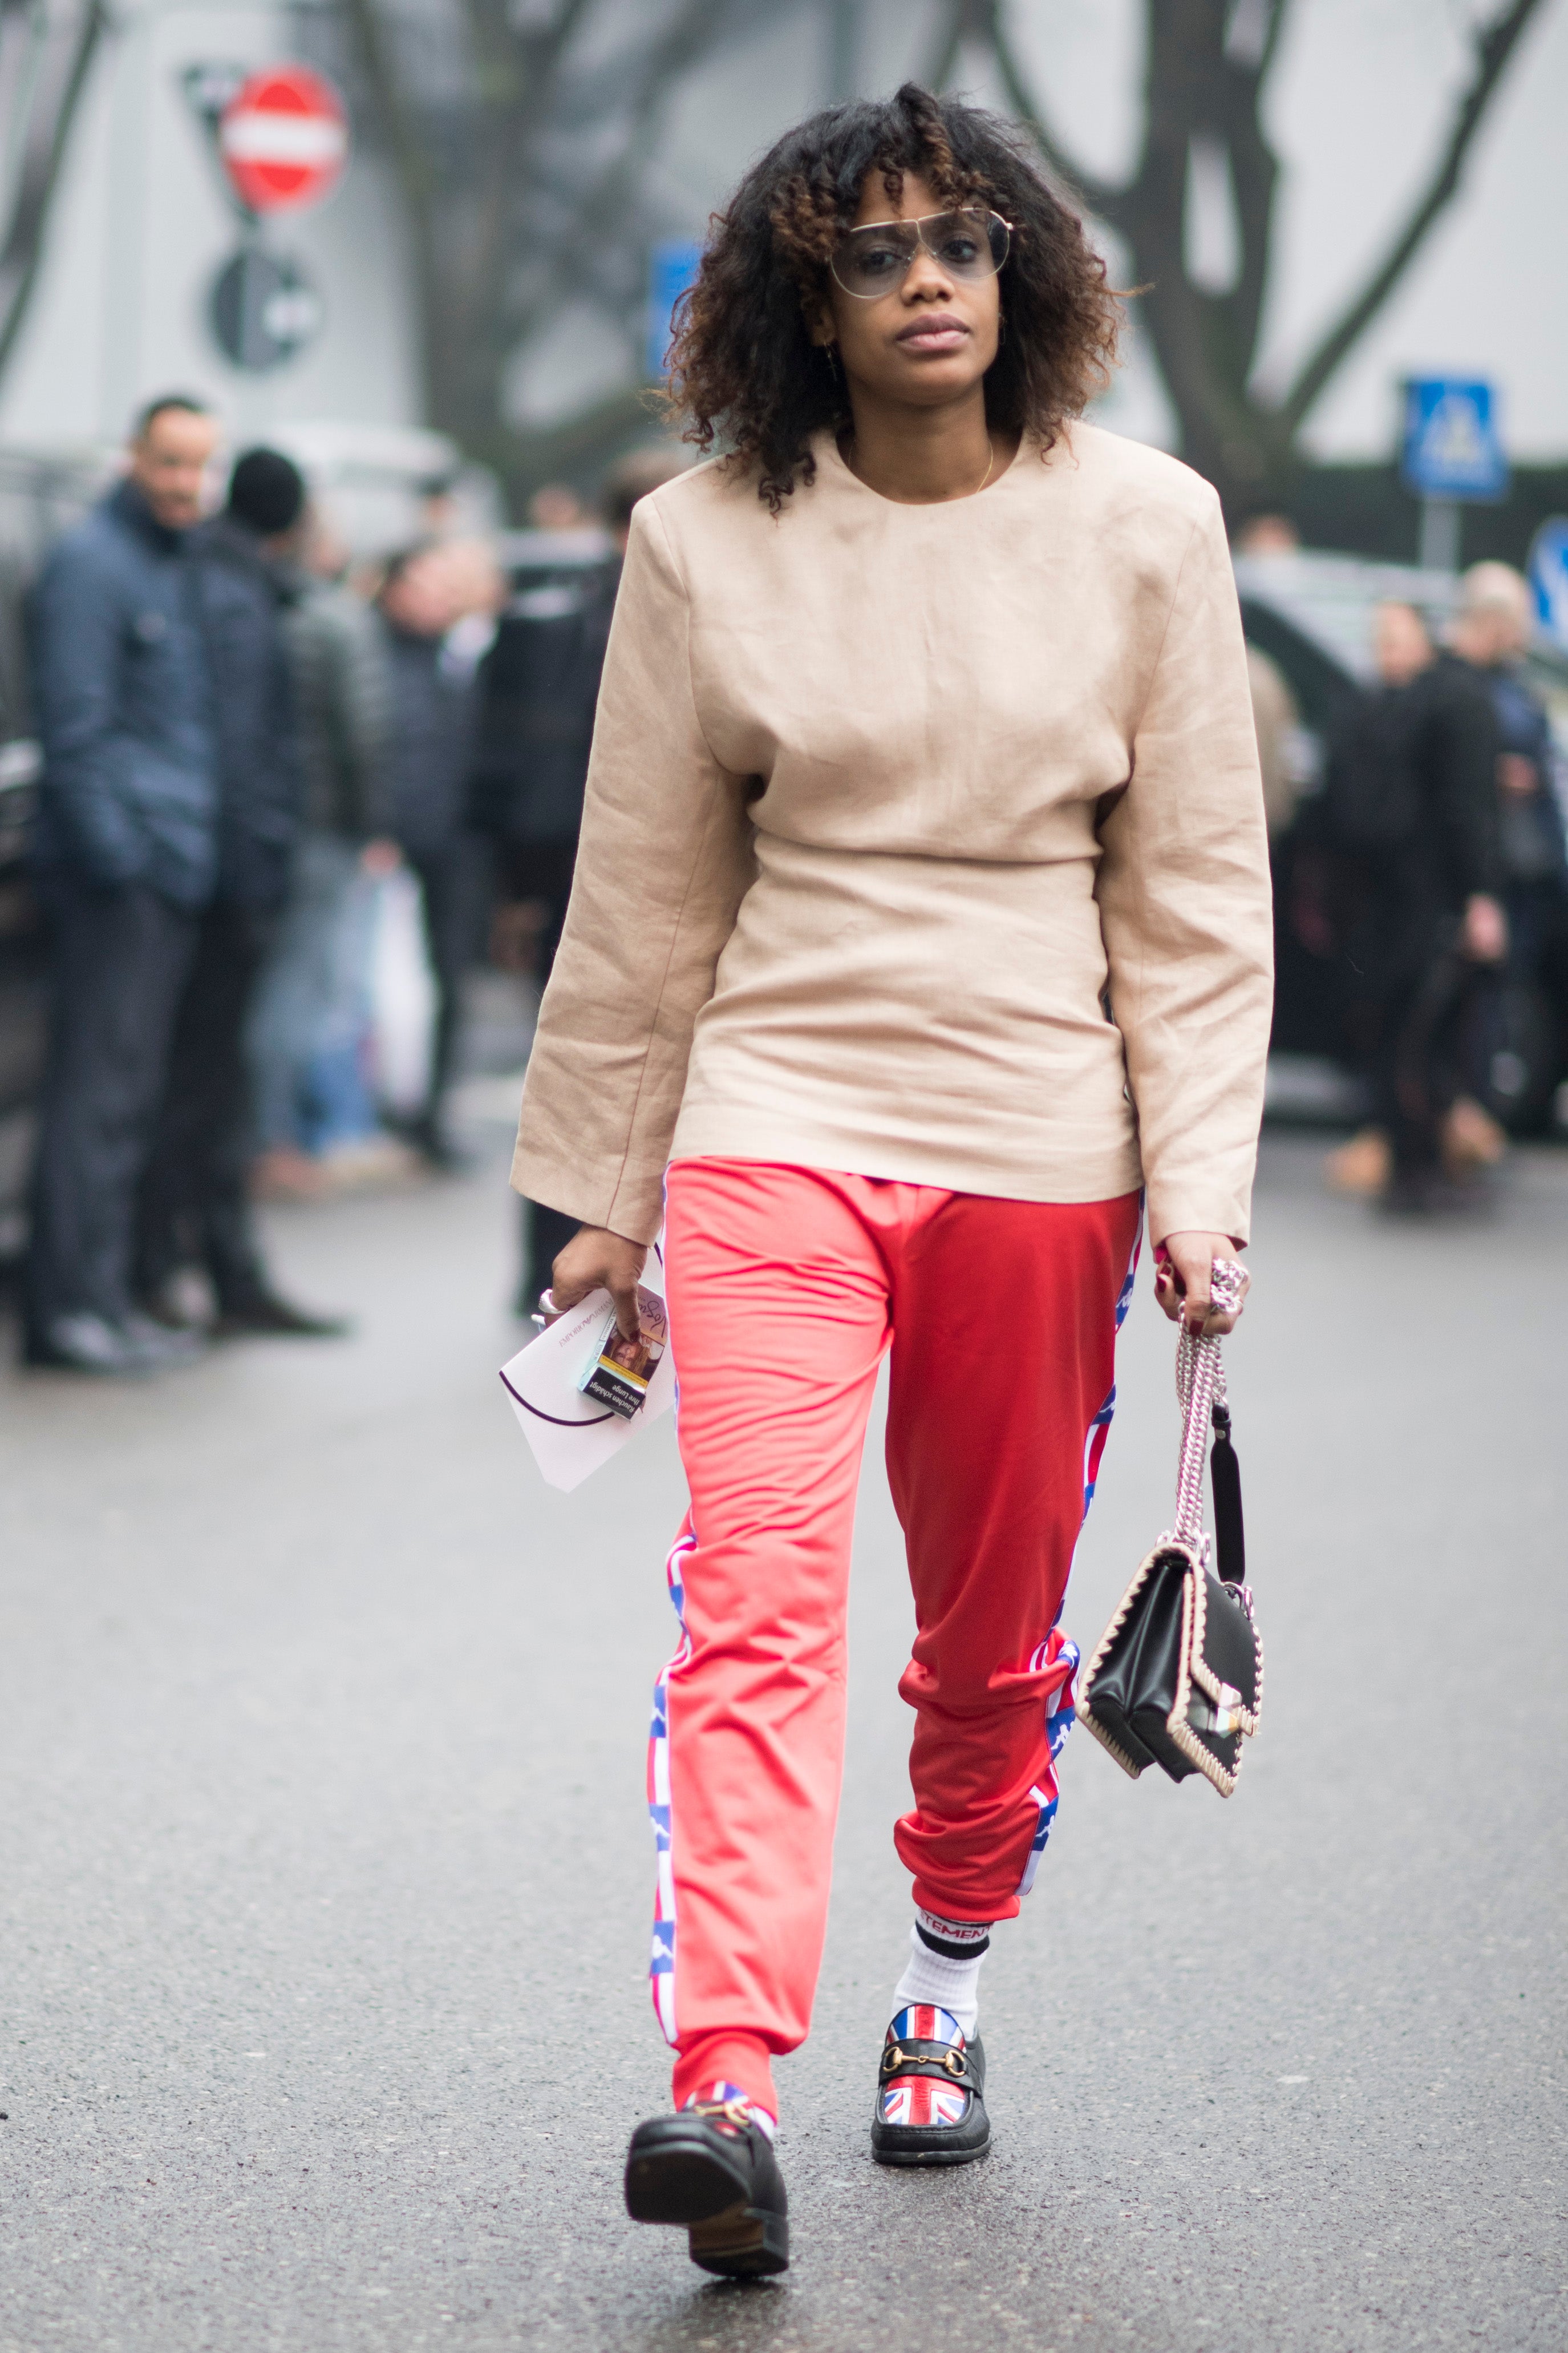 Ciao Bella! The Best Street Style Looks From Milan Fashion Week
